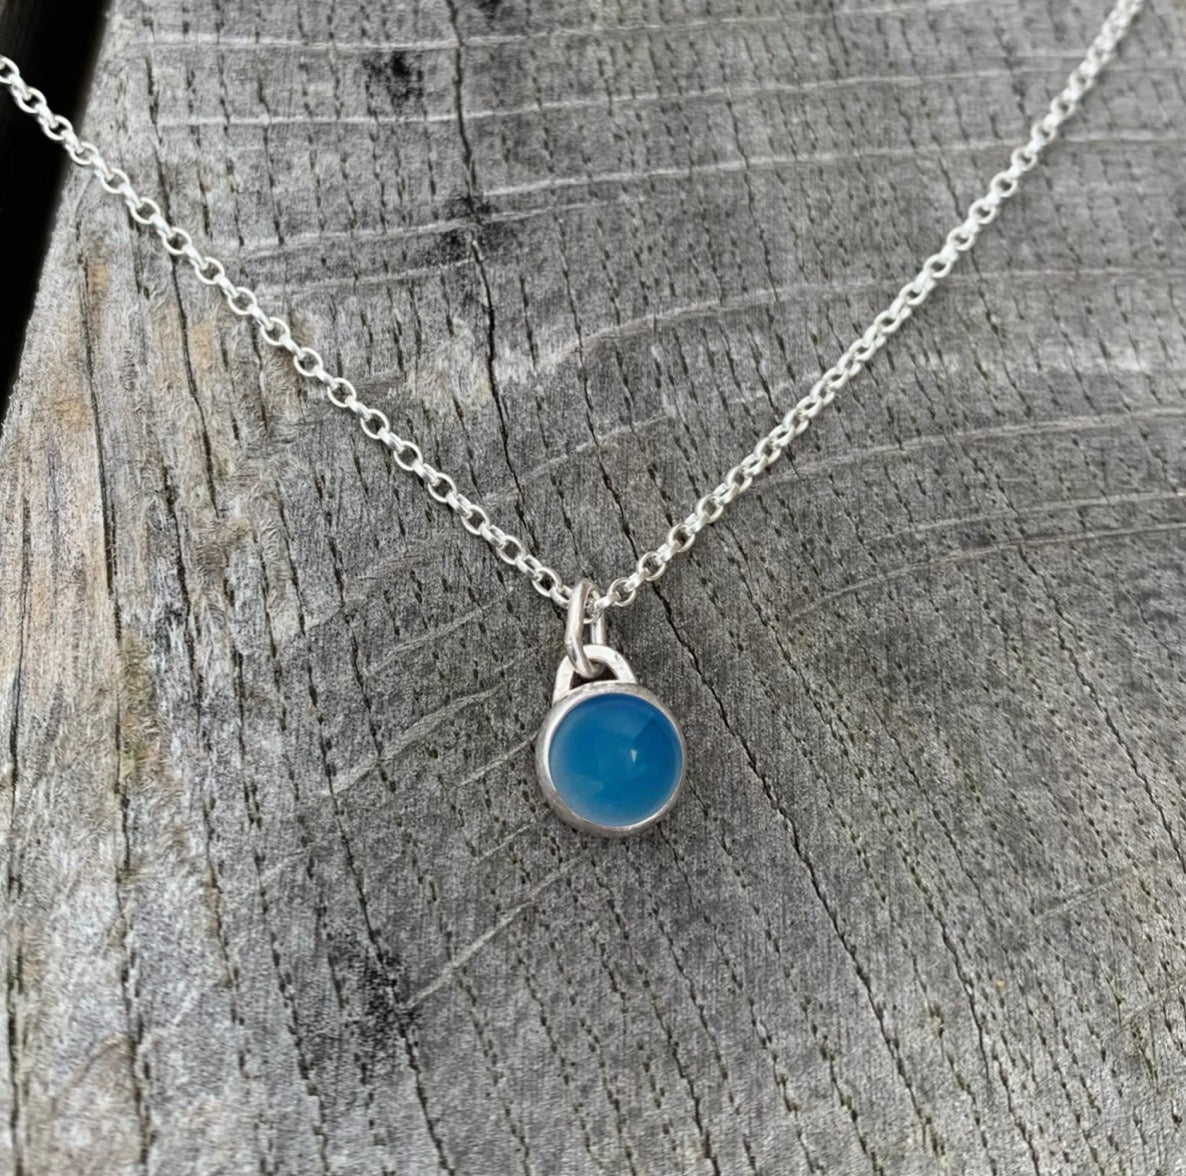 A blue agate stone set in silver on a sterling silver chain.